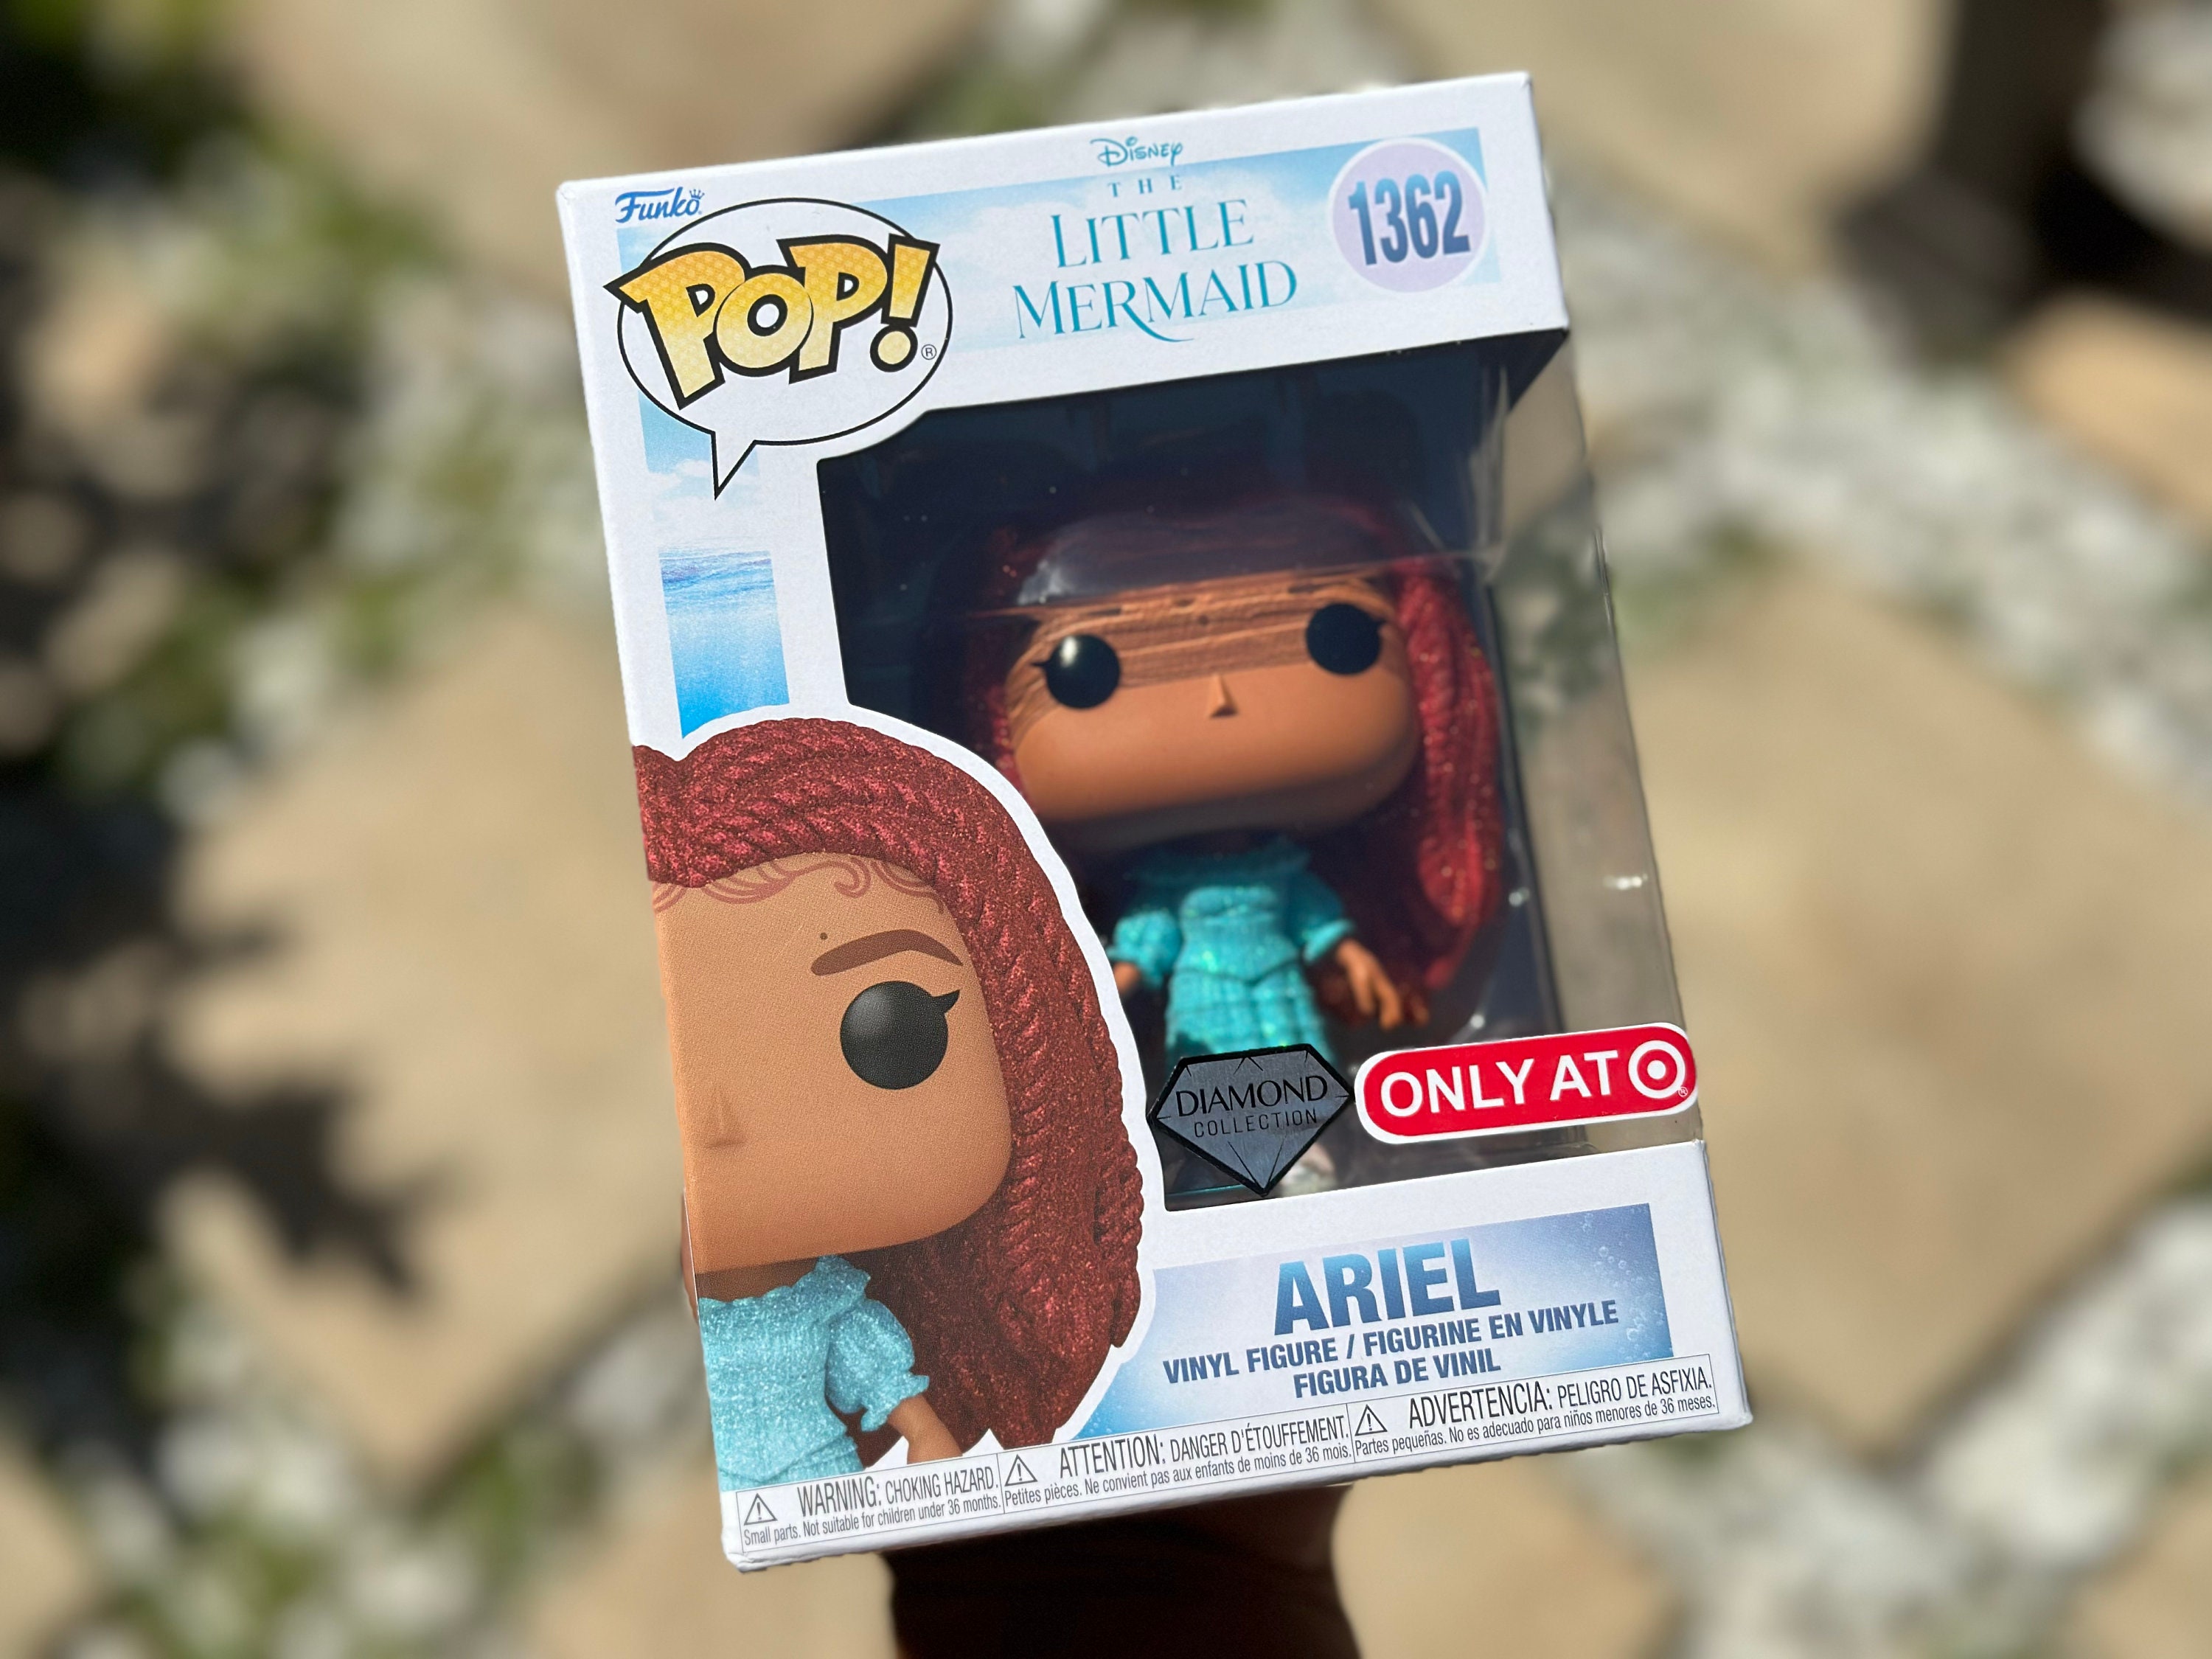 Funko Pop! Disney: Lilo & Stitch - Stitch with Ukulele Diamond Collect –  AAA Toys and Collectibles